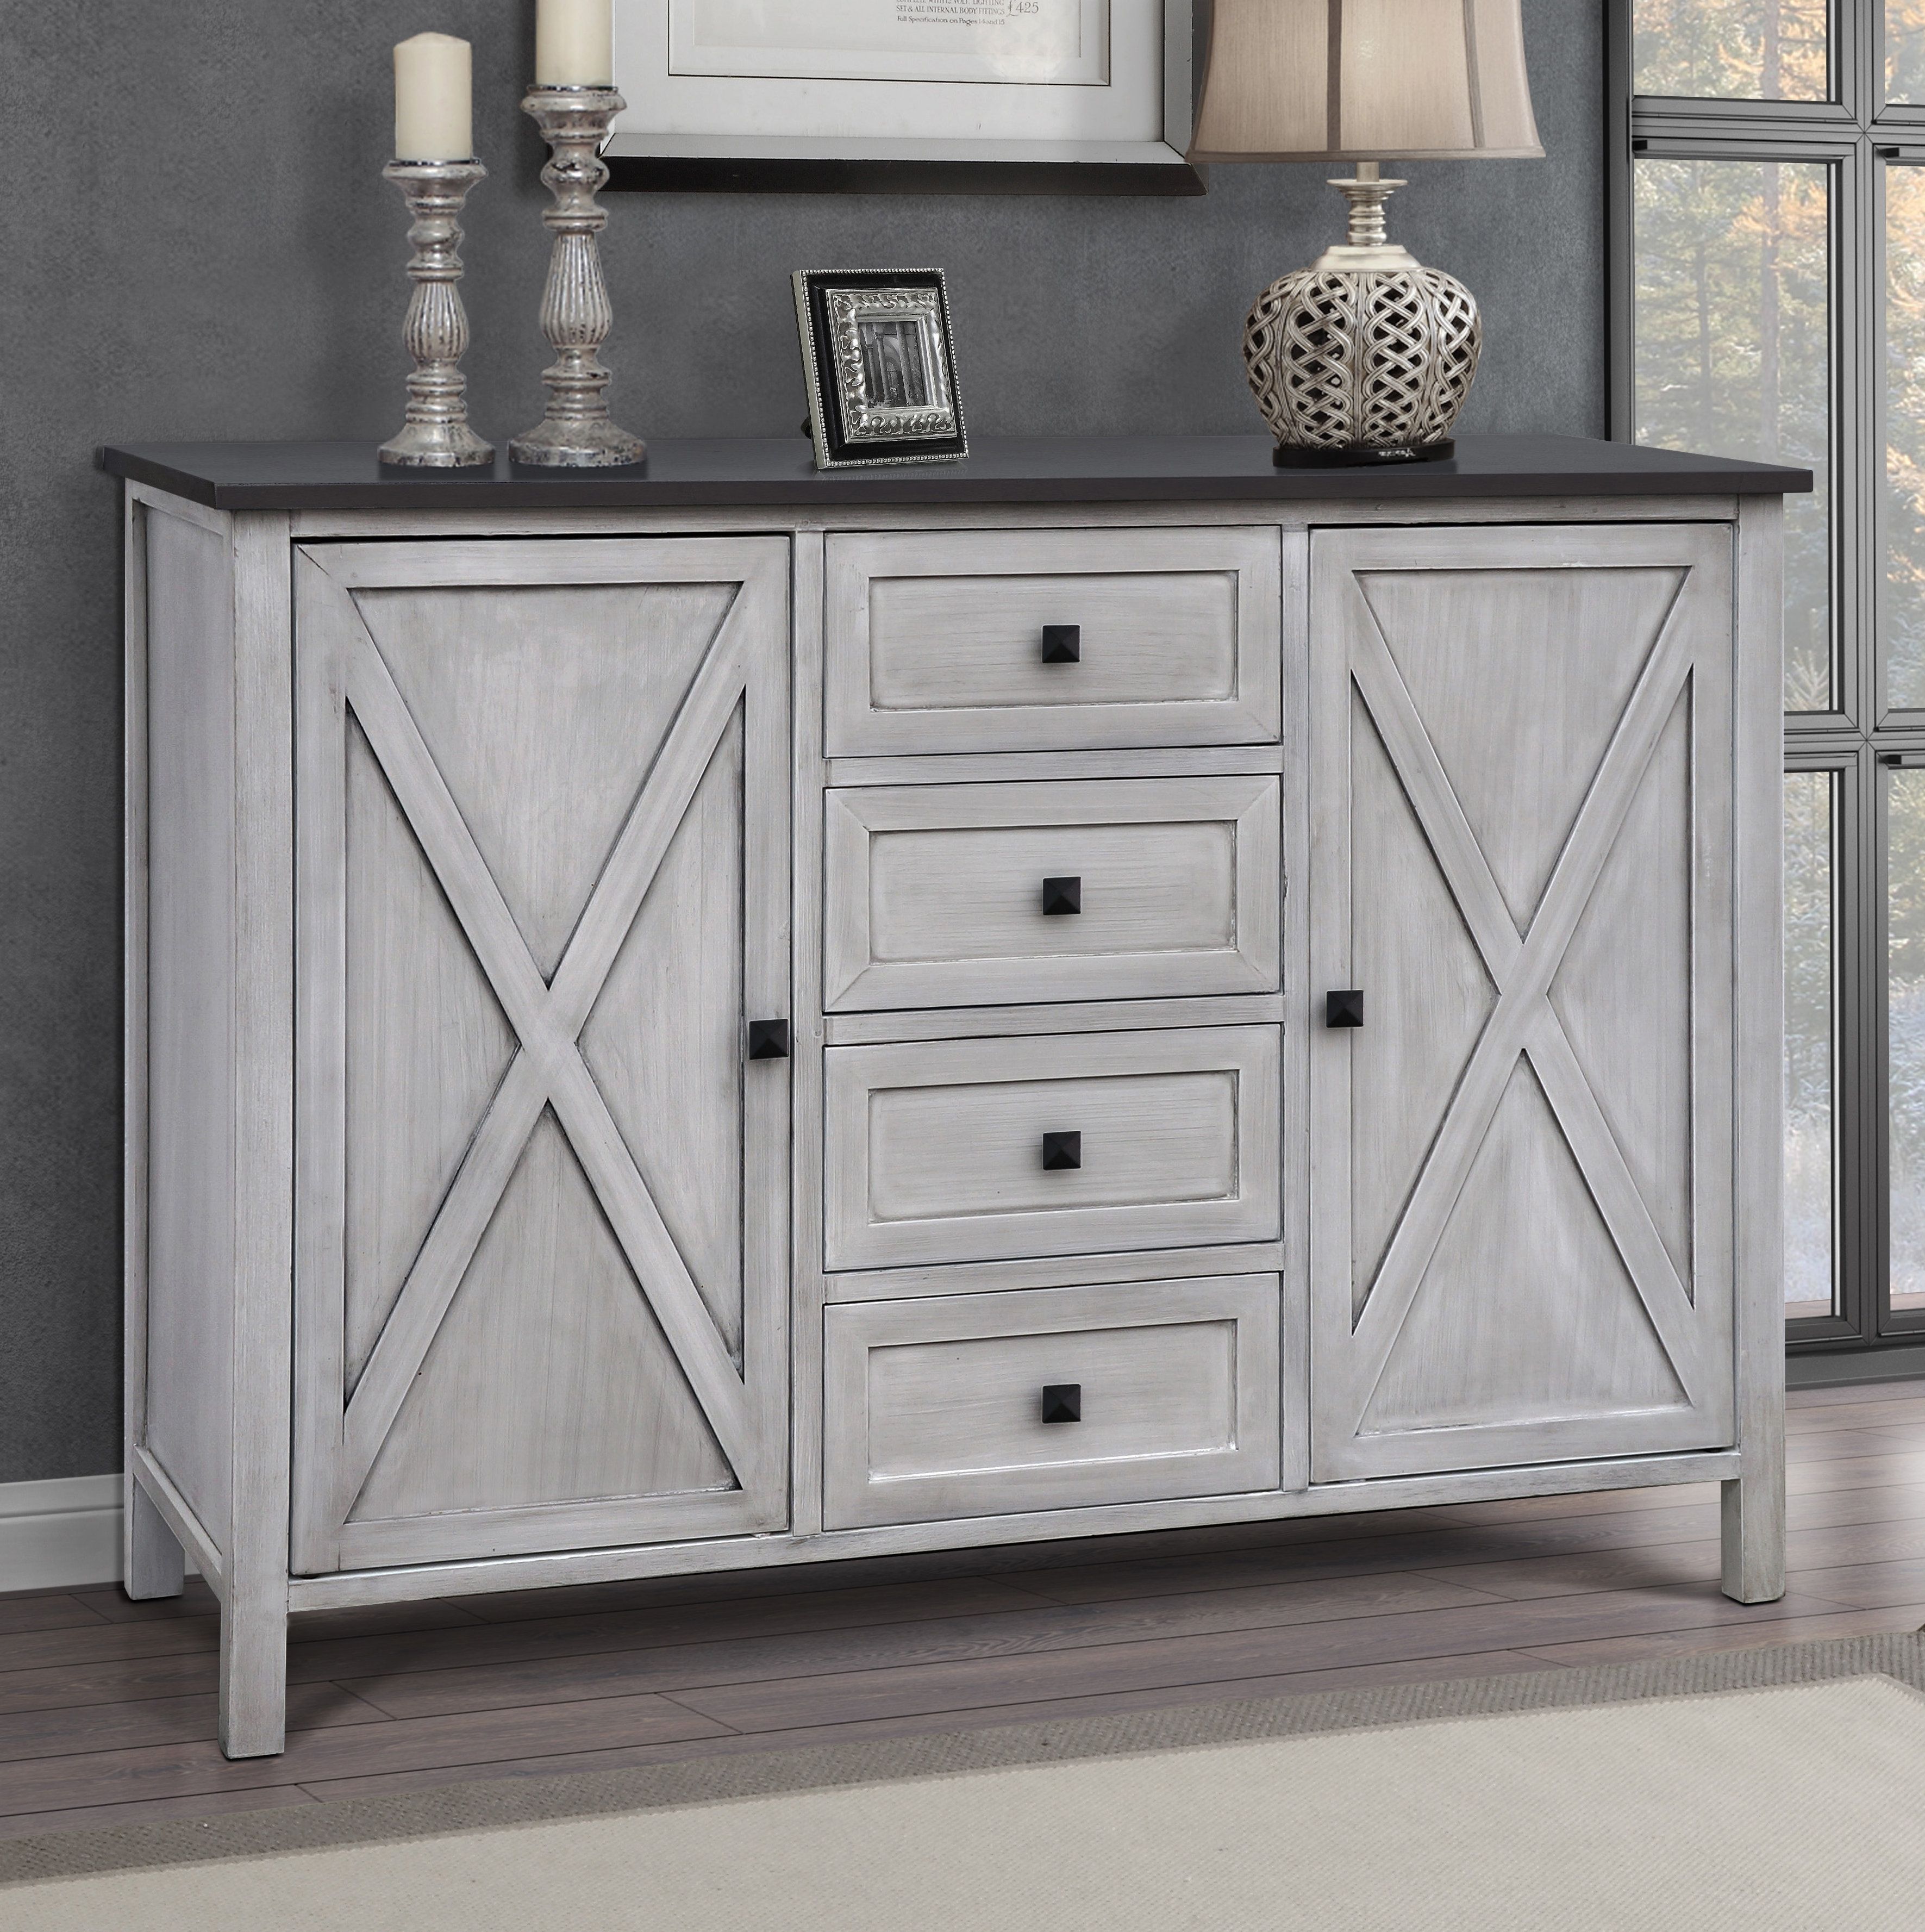 Lamb Farmhouse 4 Drawer 2 Door Accent Cabinet | Birch Lane Inside Most Current 4 Door 4 Drawer Metal Inserts Sideboards (View 14 of 20)